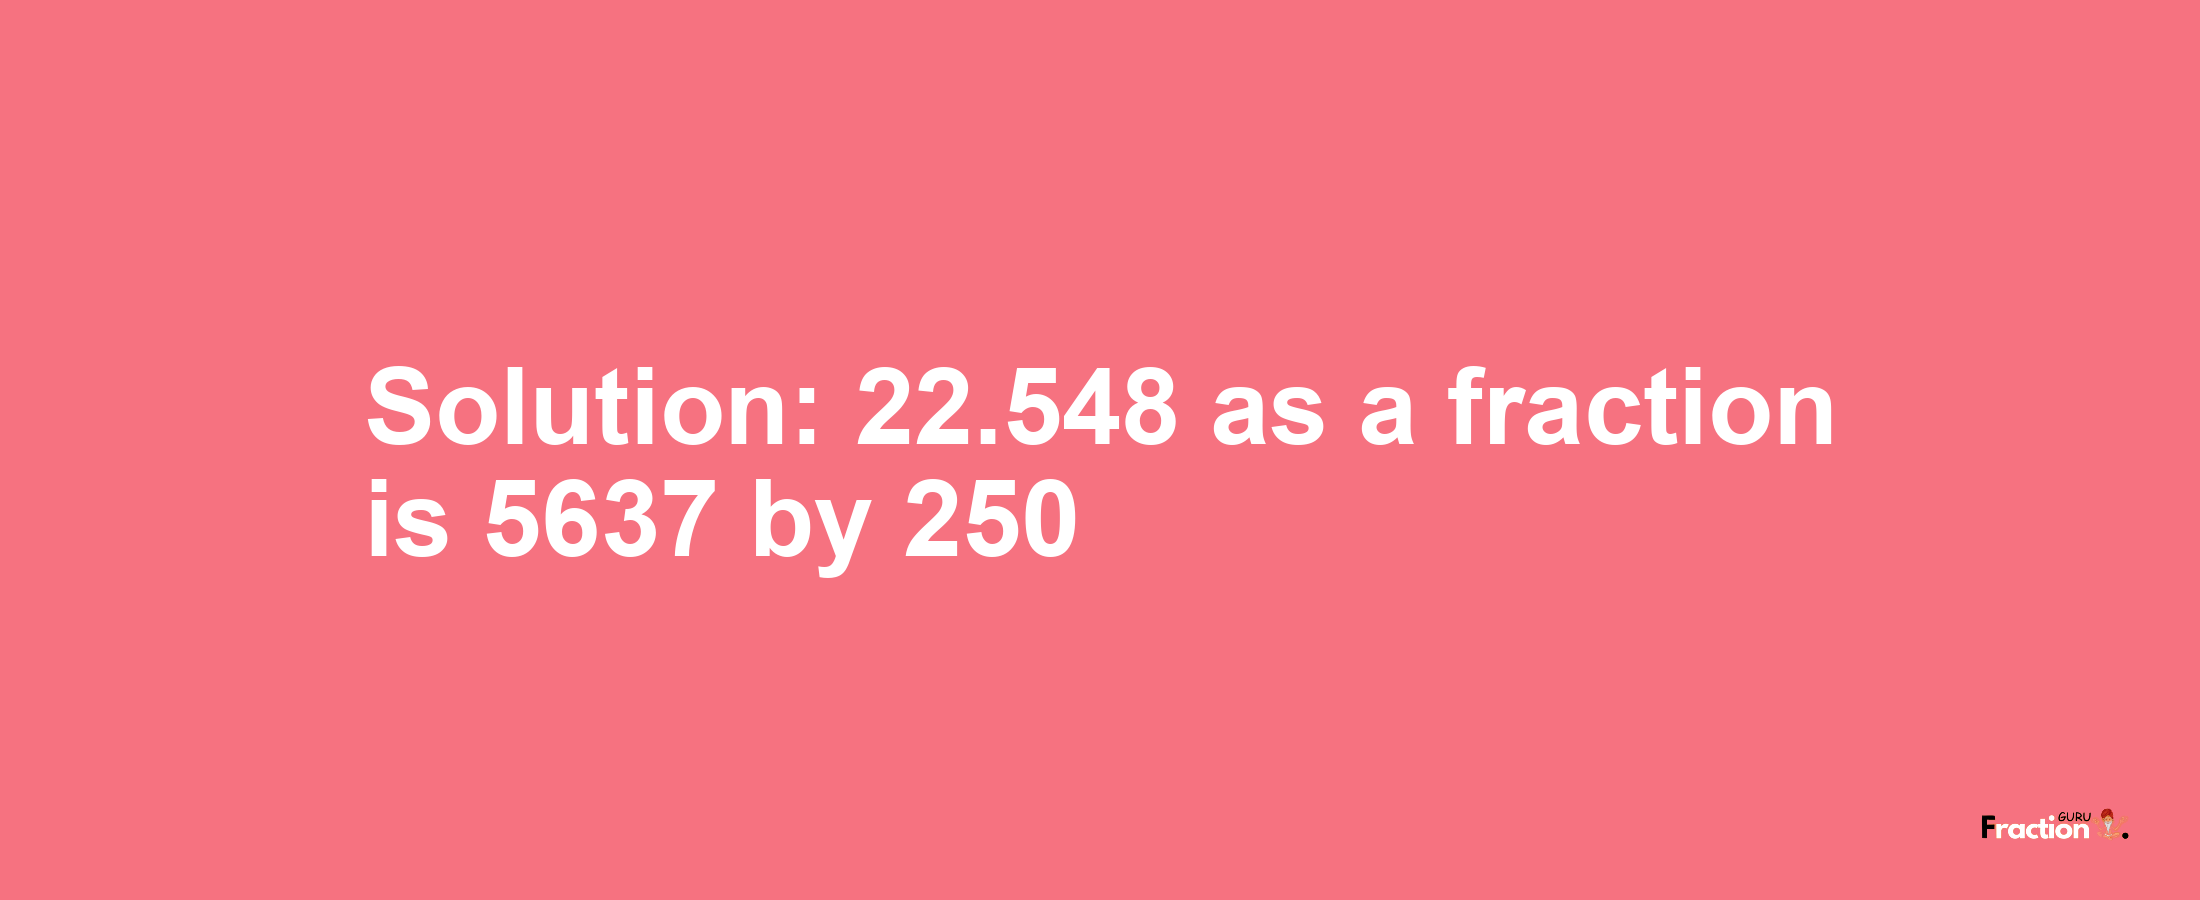 Solution:22.548 as a fraction is 5637/250